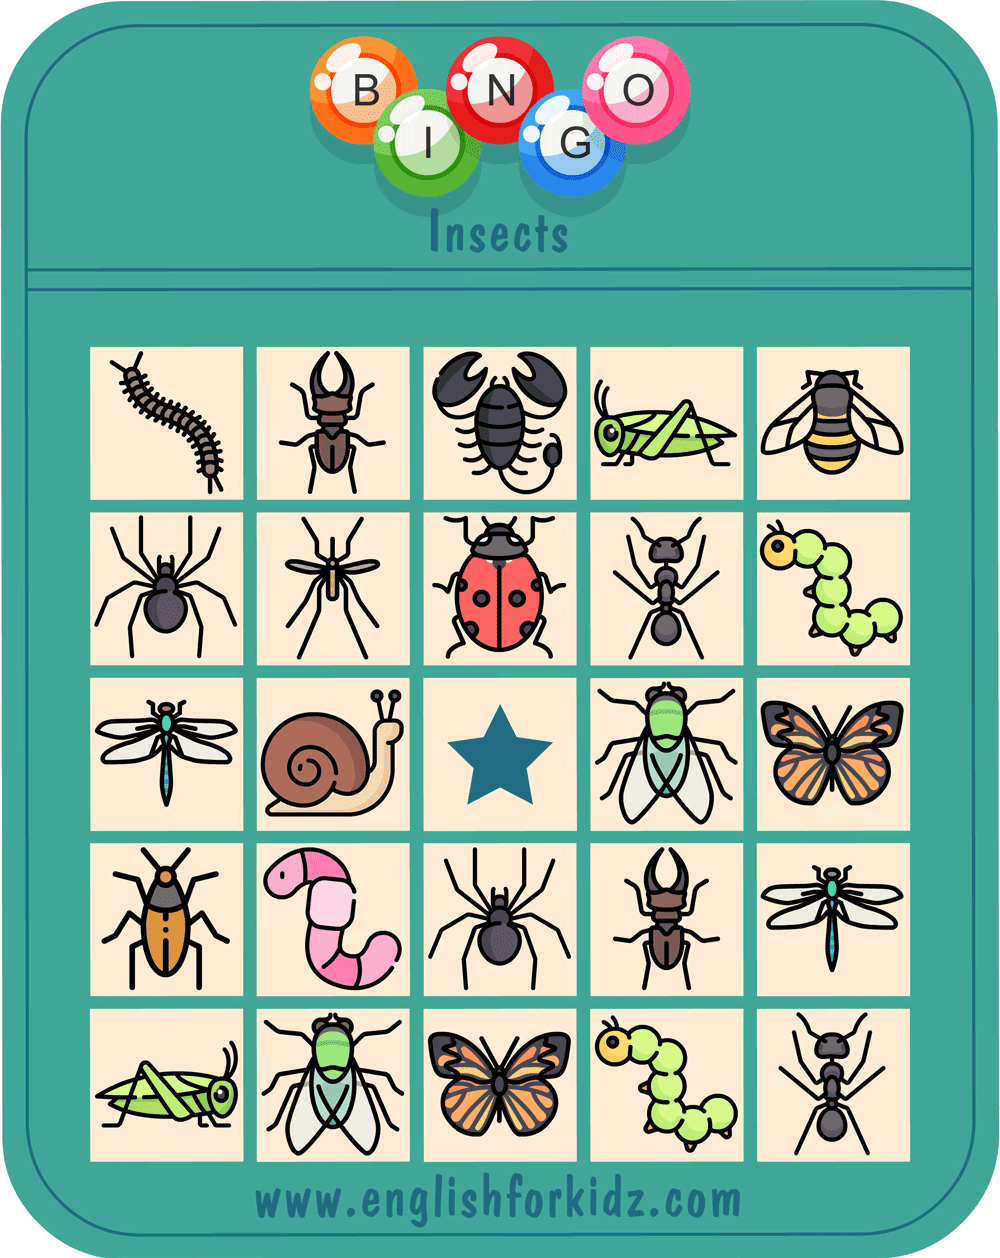 Insects Bingo Game Printable